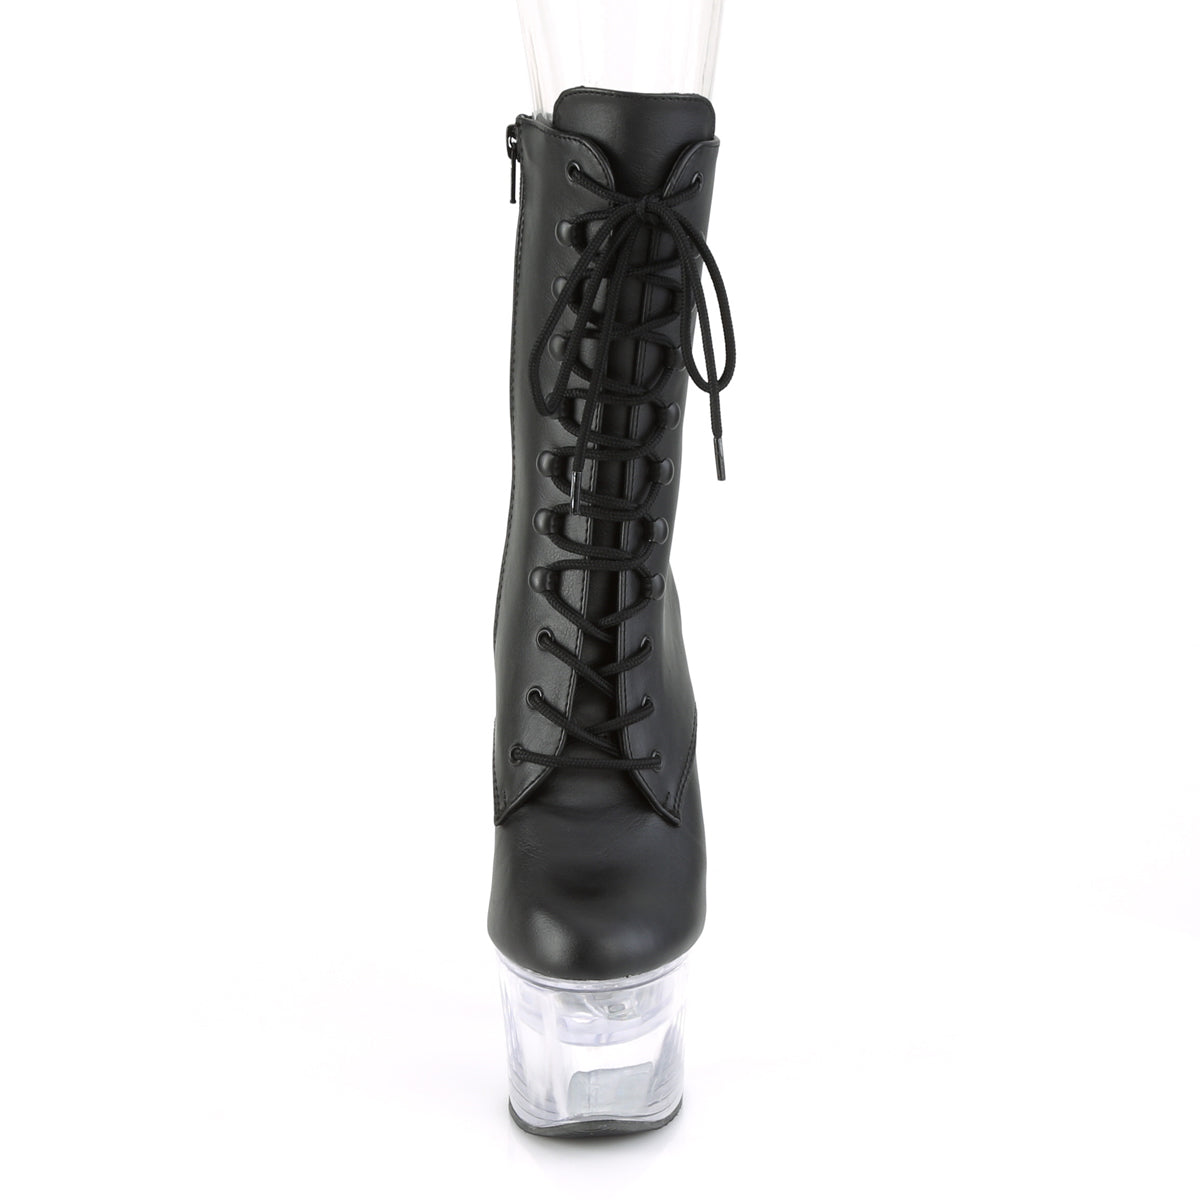 FLASHDANCE-1020-7 Pleaser Black Faux Leather/Clear Platform Shoes [Kinky Boots]